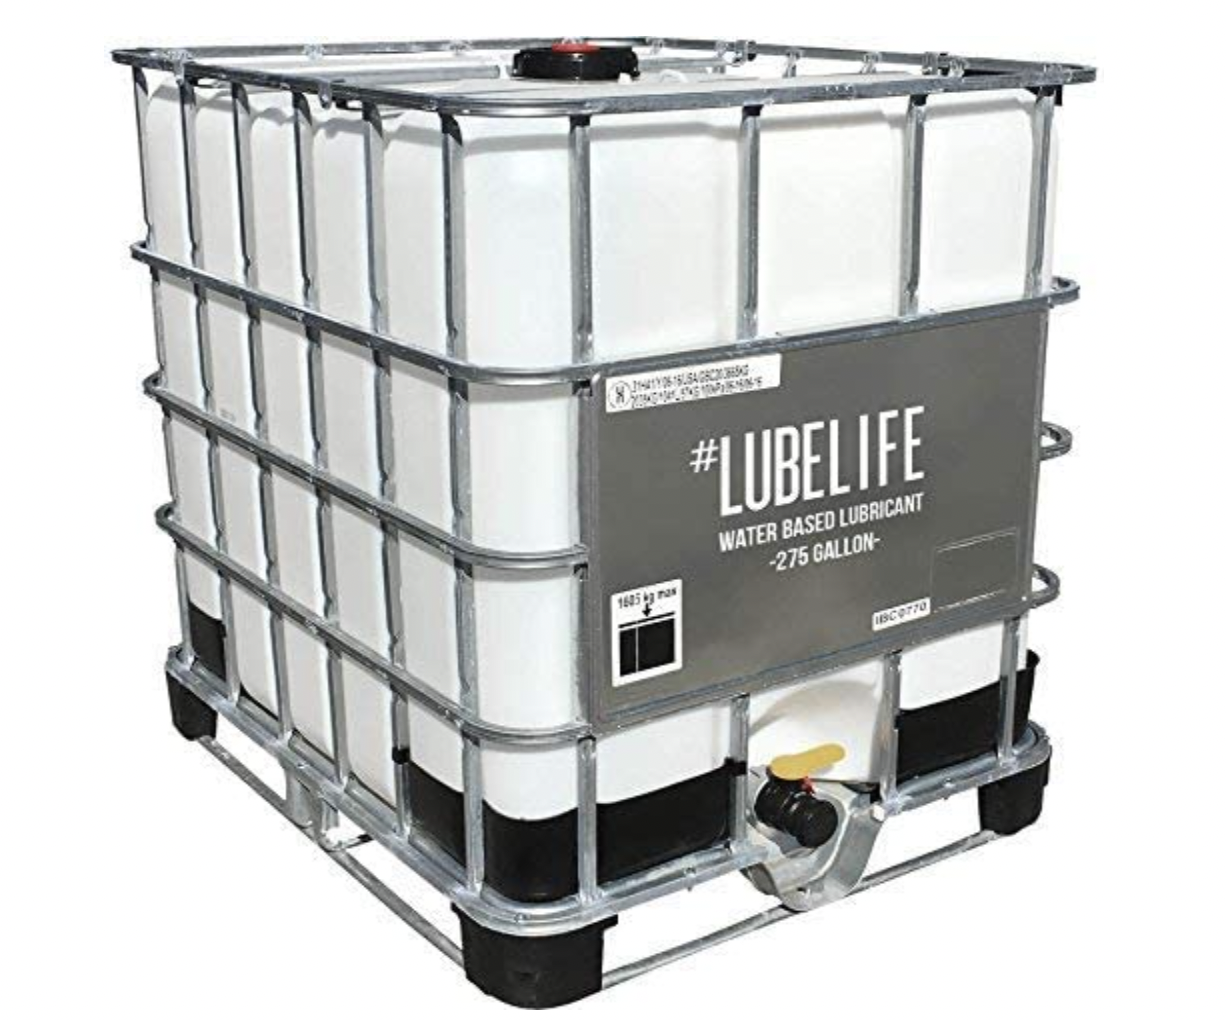 You Can Now Order Lube Life Barrels on